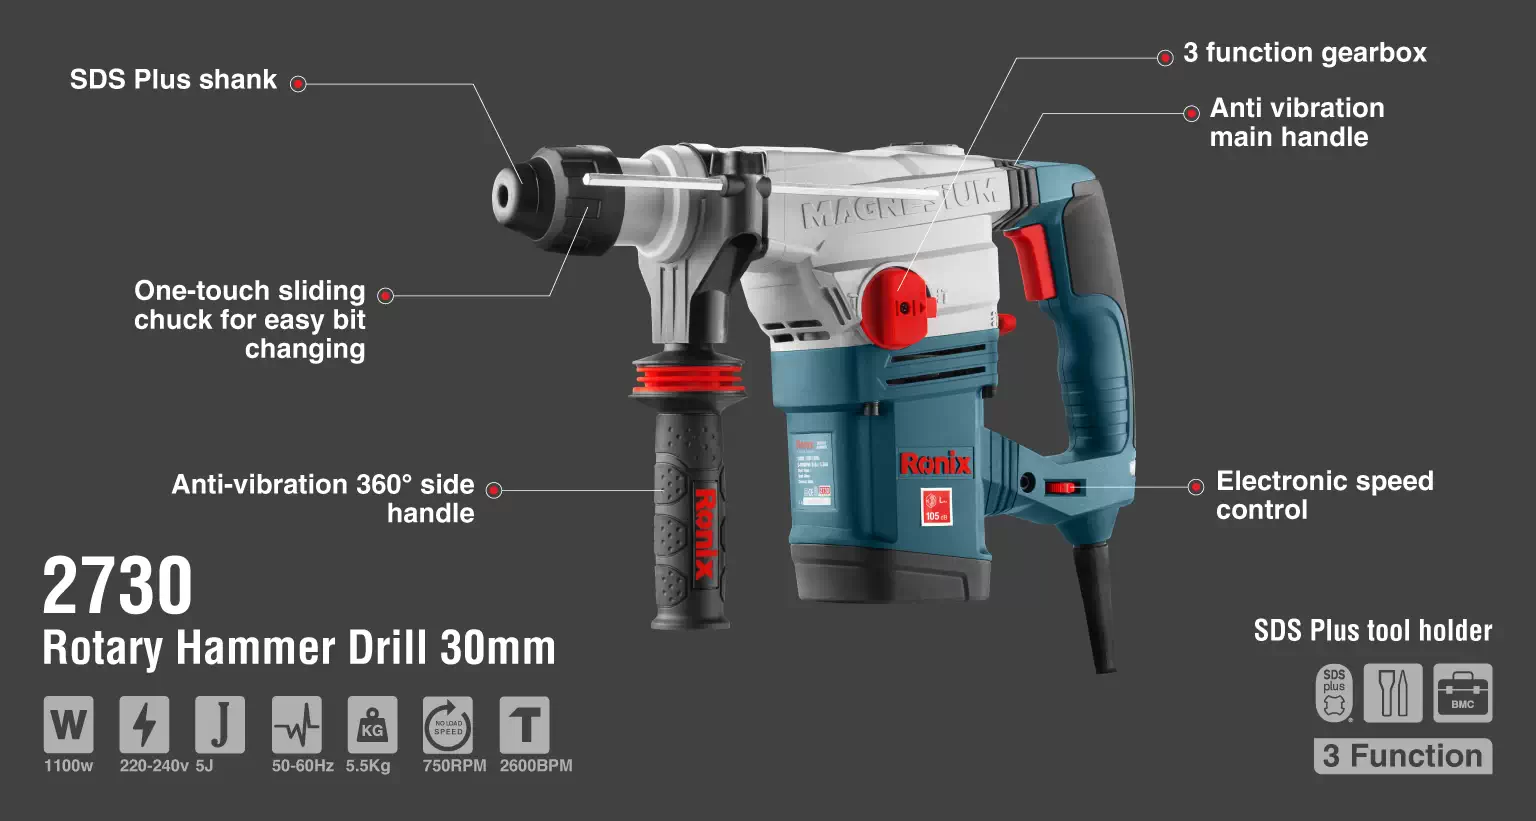 rotary hammer 30mm 1100w_details